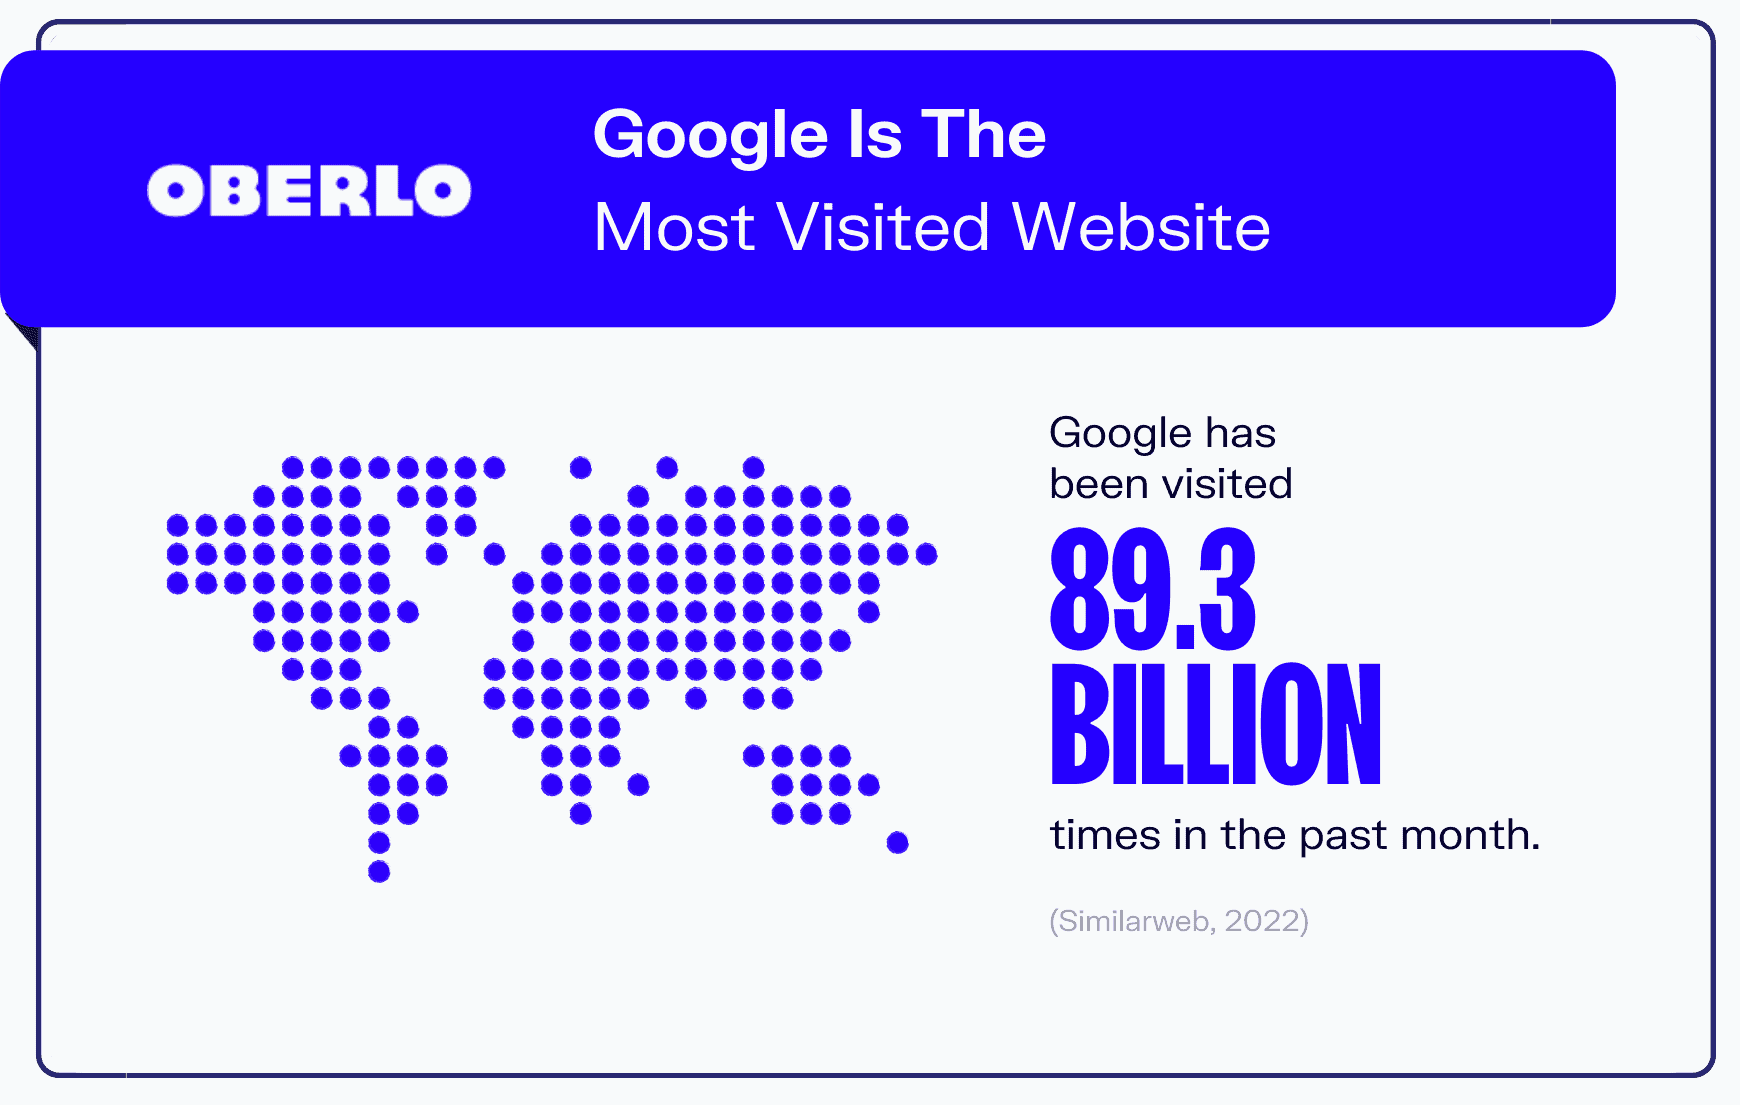 How many people visit Google